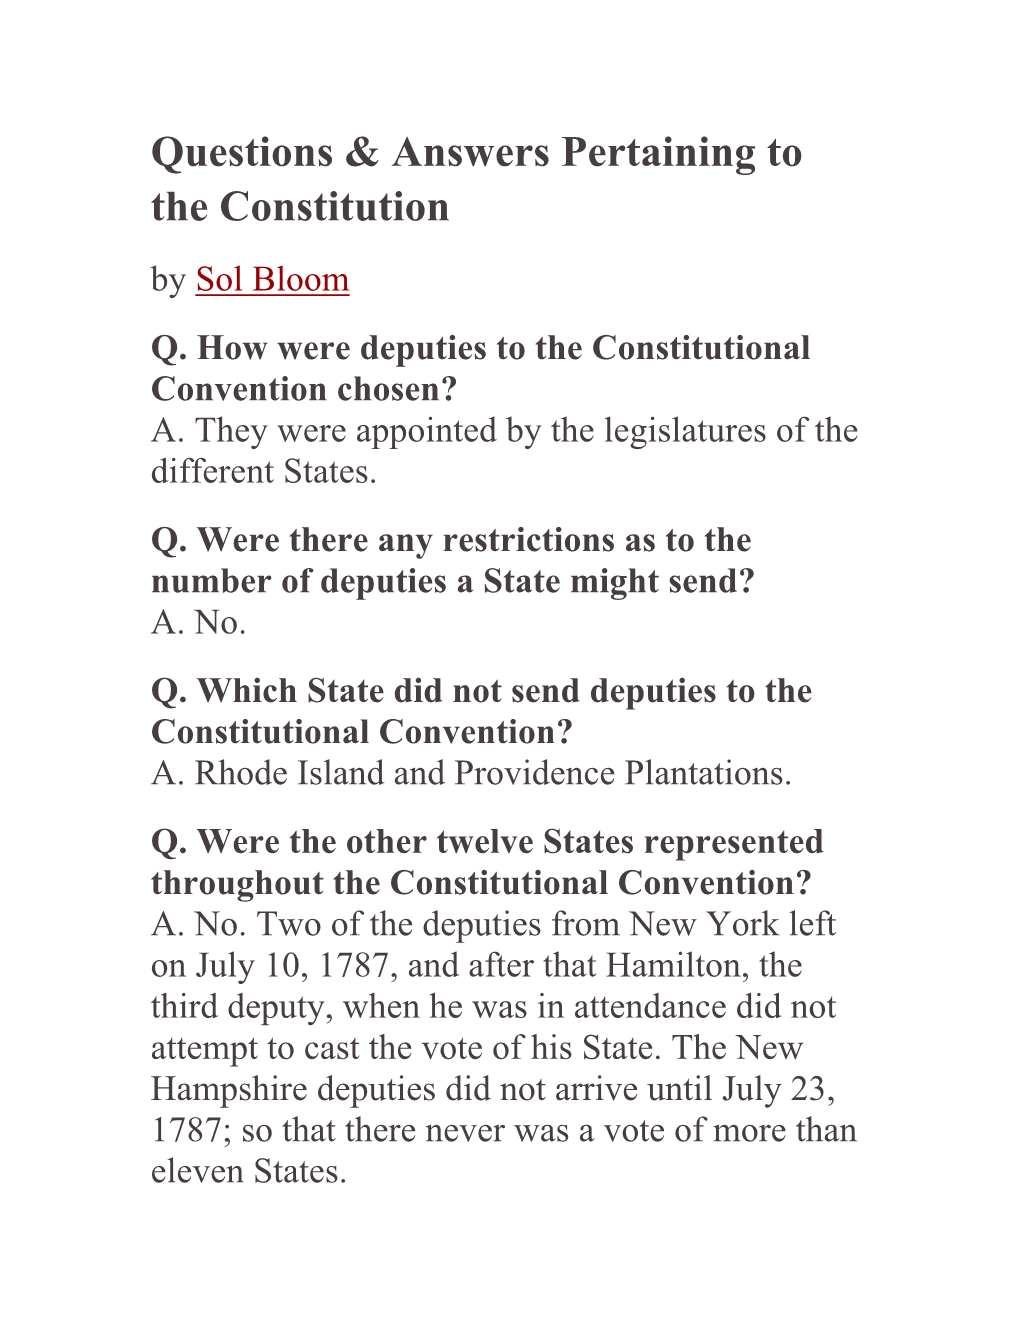 Questions & Answers Pertaining to the Constitution